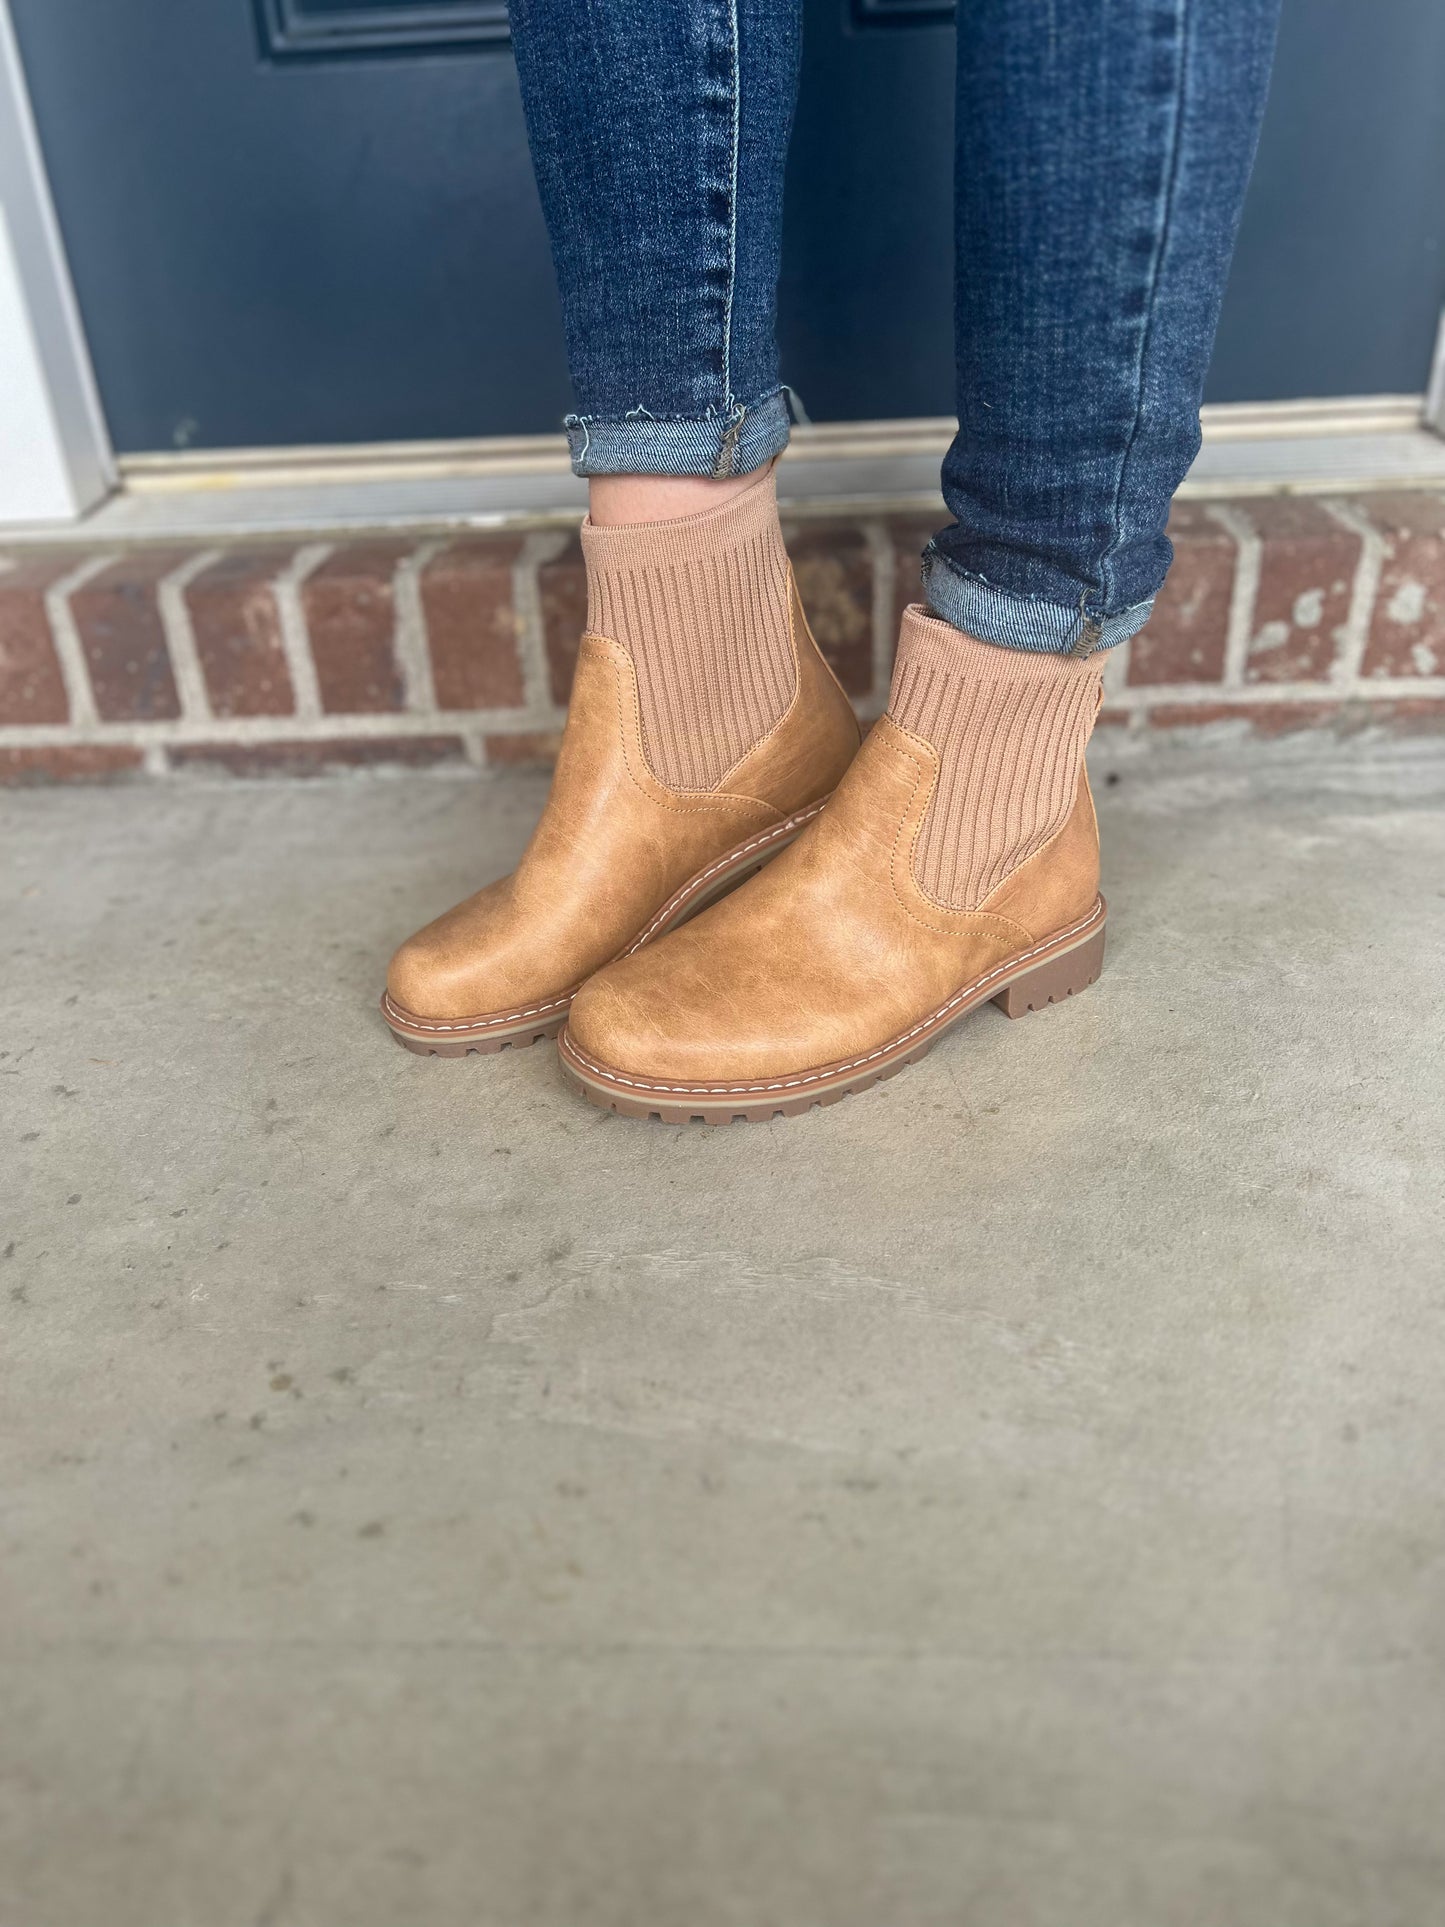 New! Corkys Cabin Fever Boot - Caramel